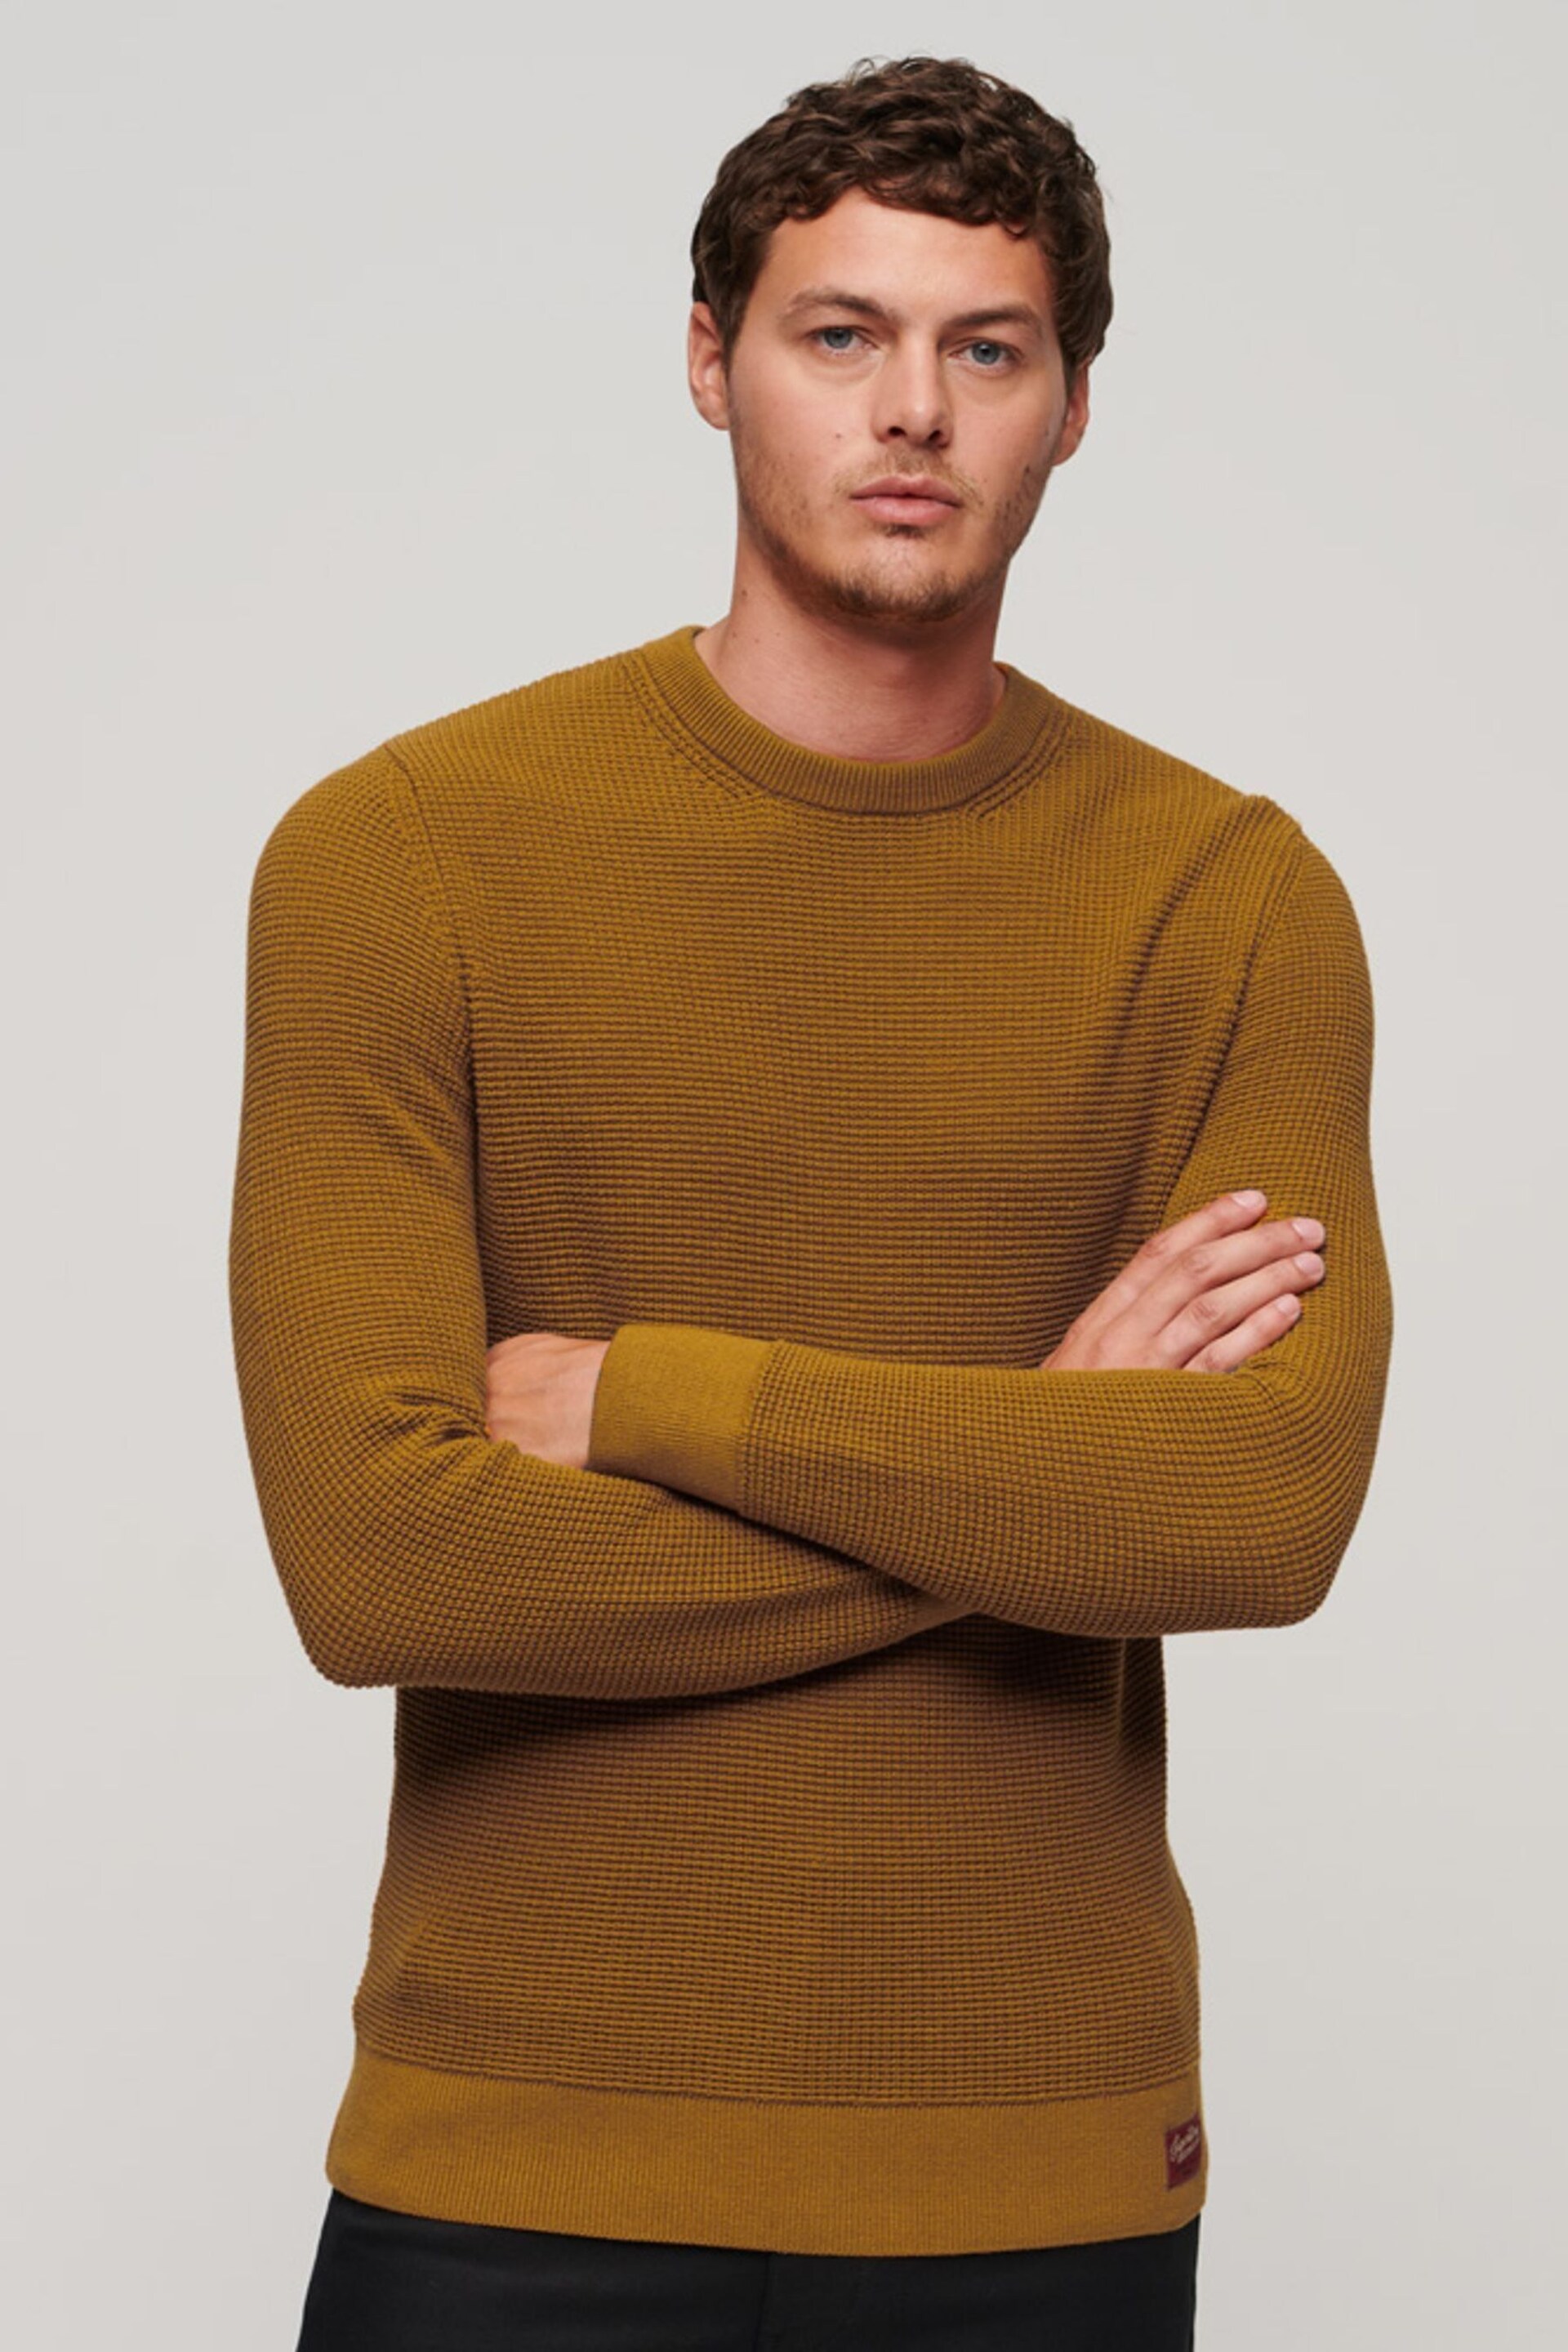 Superdry Musturd Yellow Textured Crew Knit Jumper - Image 1 of 6